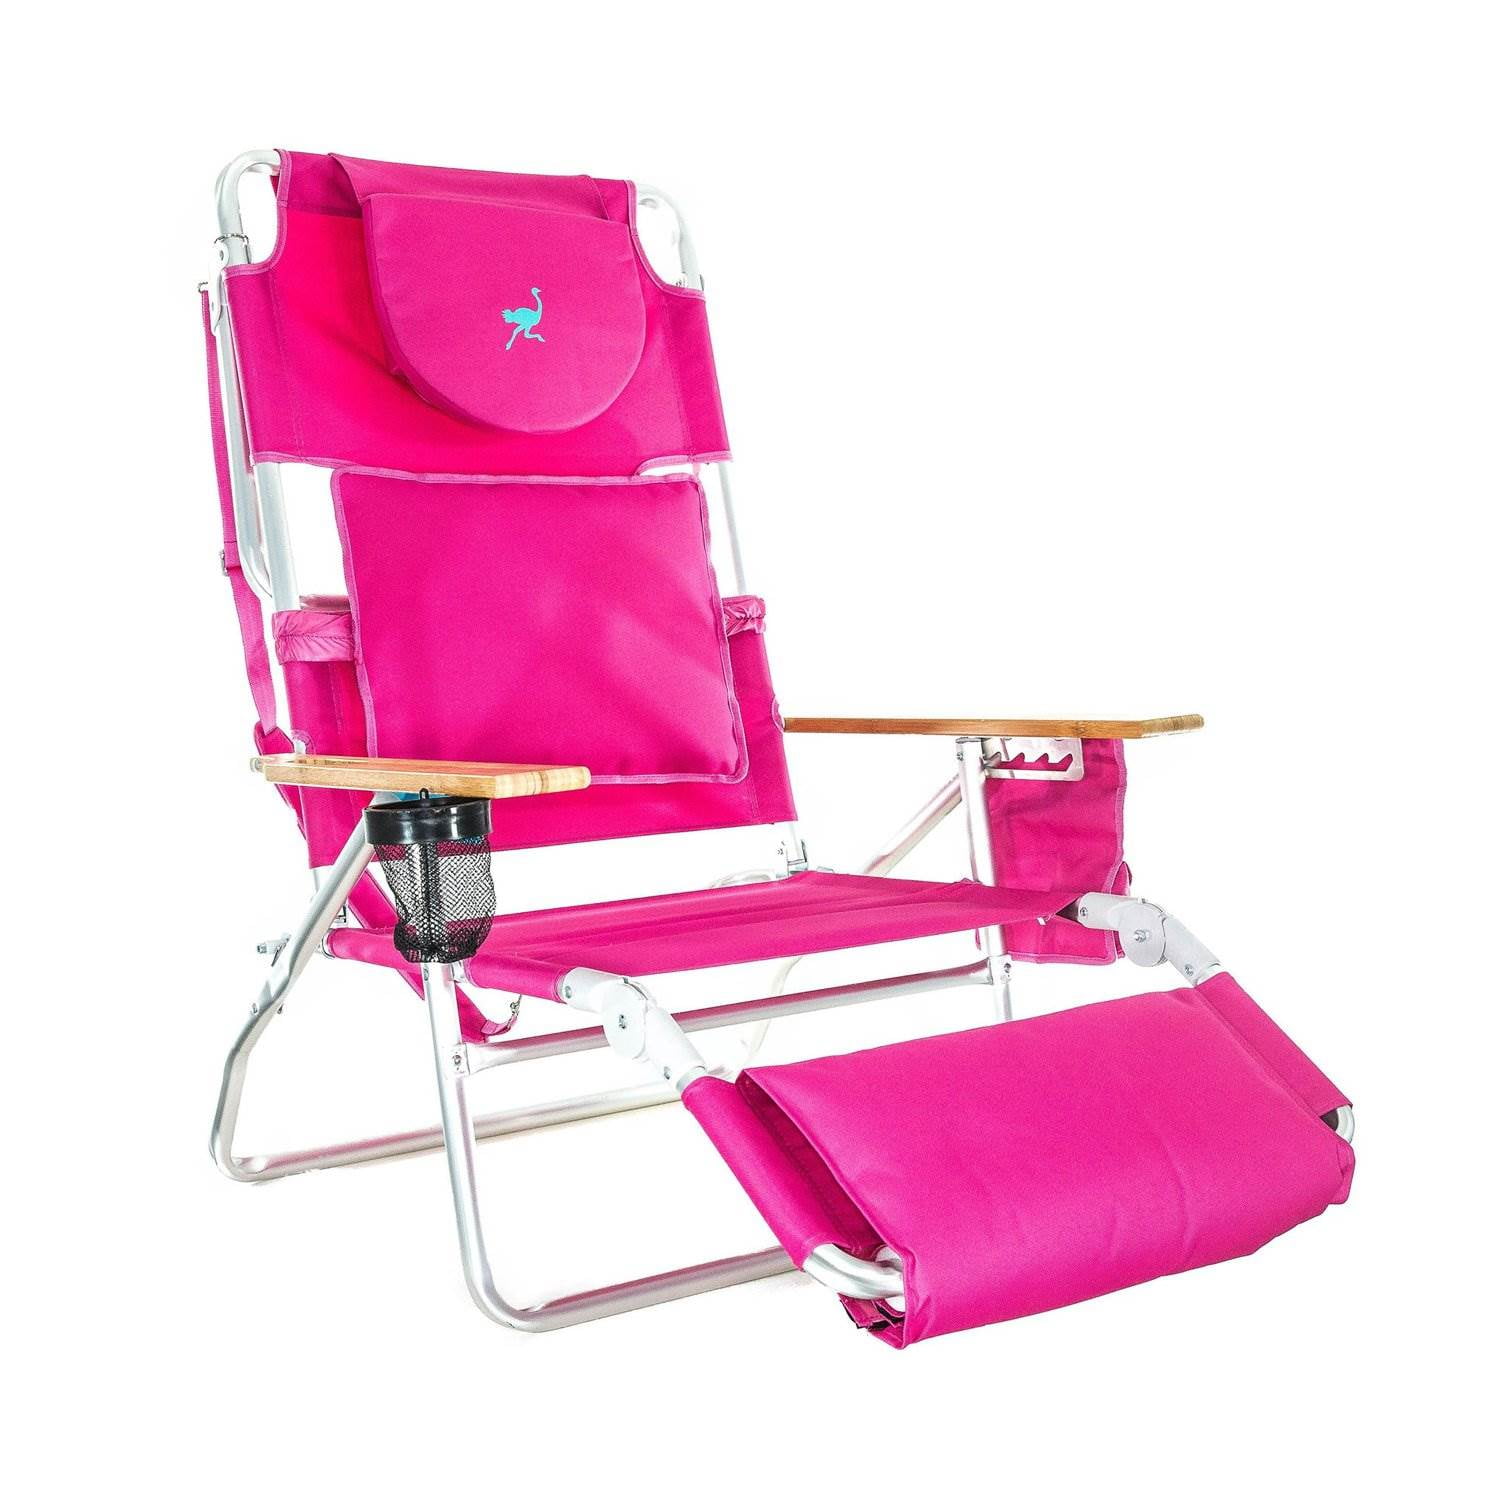  Ostrich 3 In 1 Beach Chair Reviews for Small Space